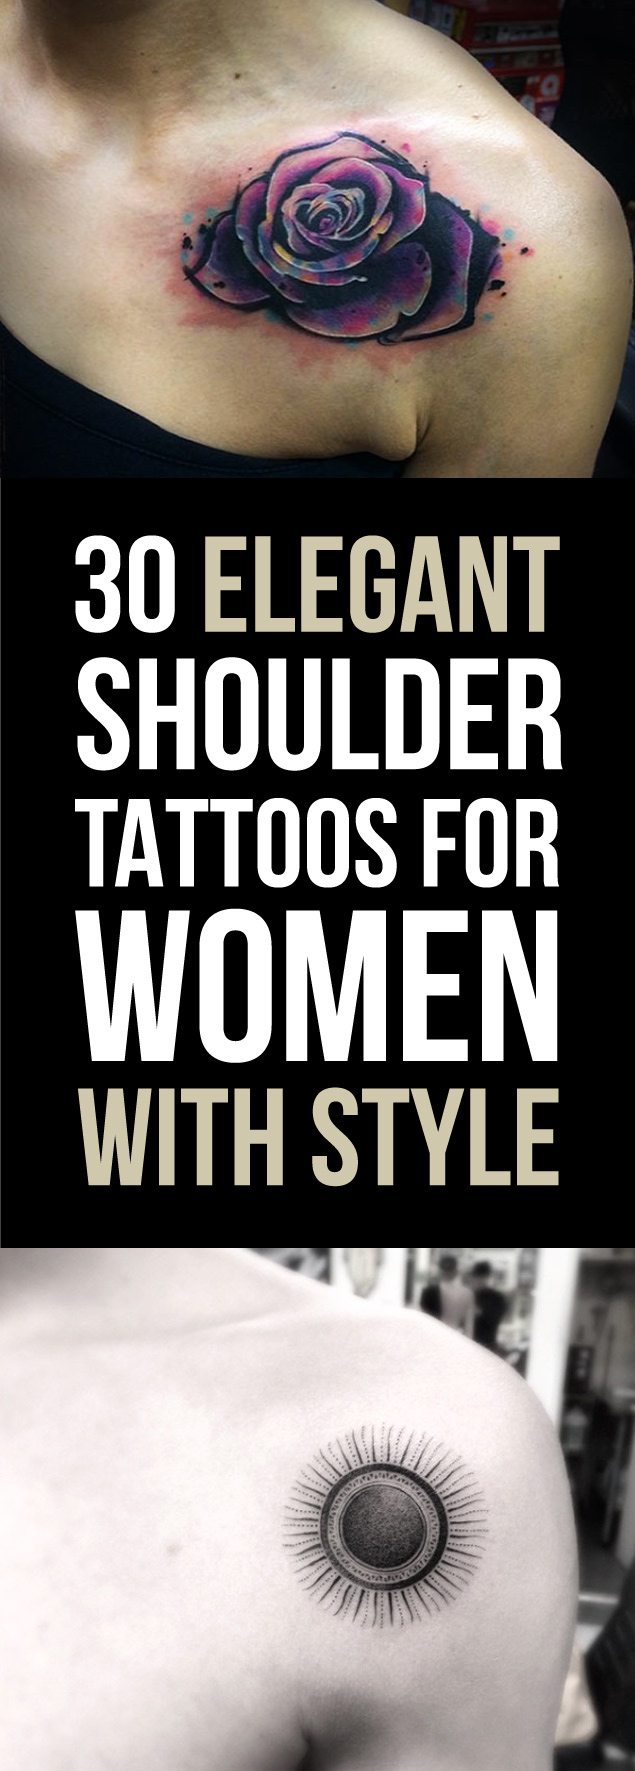 30 Elegant Shoulder Tattoos For Women With Style Tattooblend inside measurements 635 X 1771